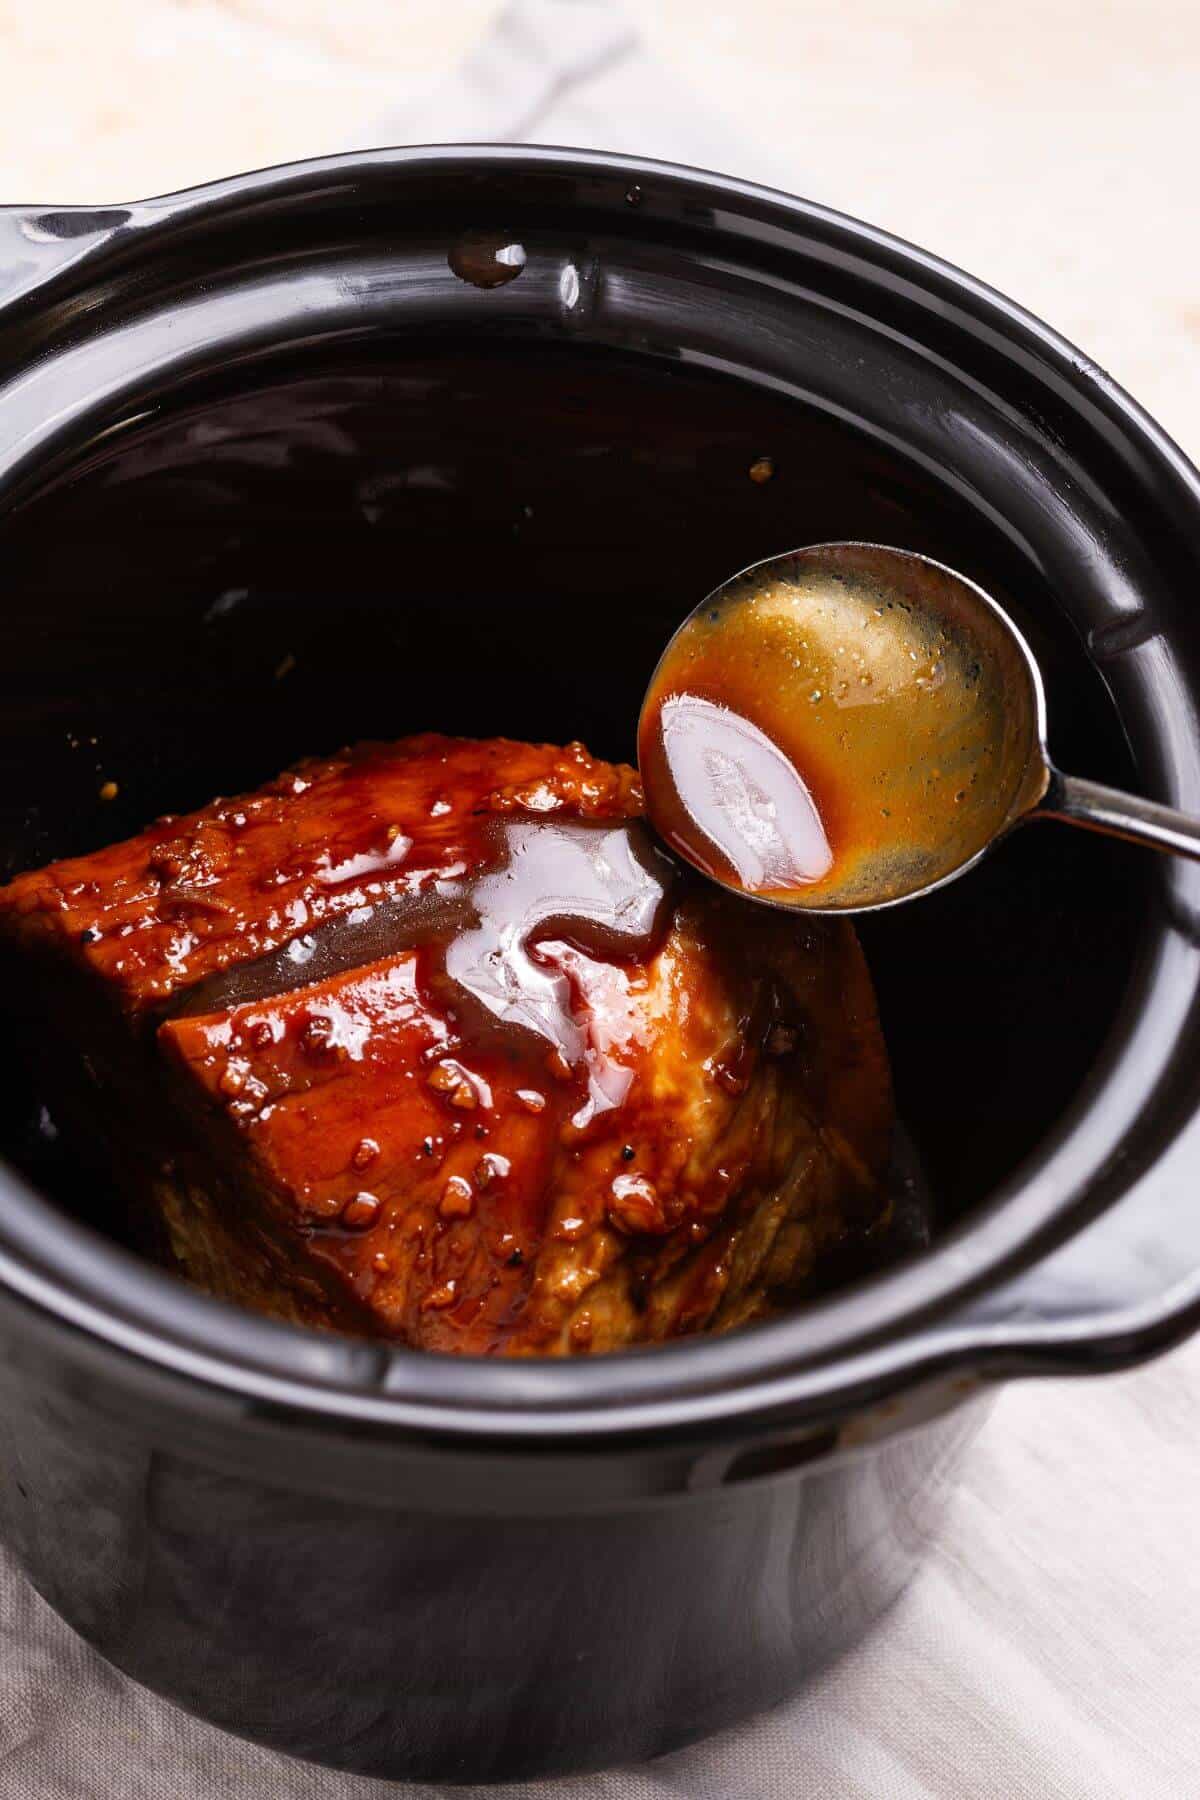 Pouring sauce over cooked pork loin in crock pot.